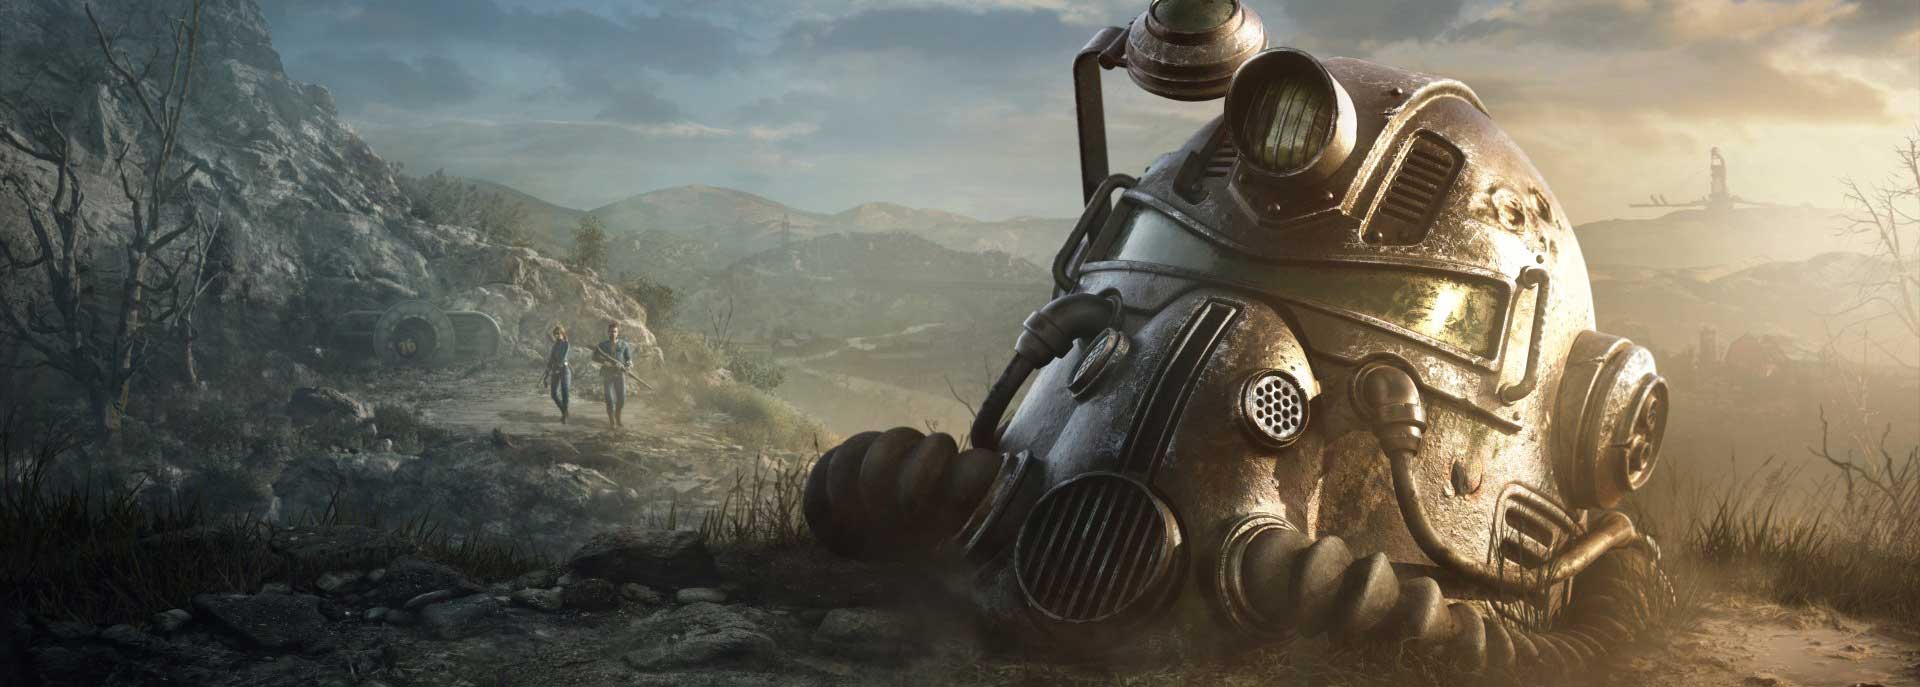 Fallout 76: TOP 5 advanced tips and tricks